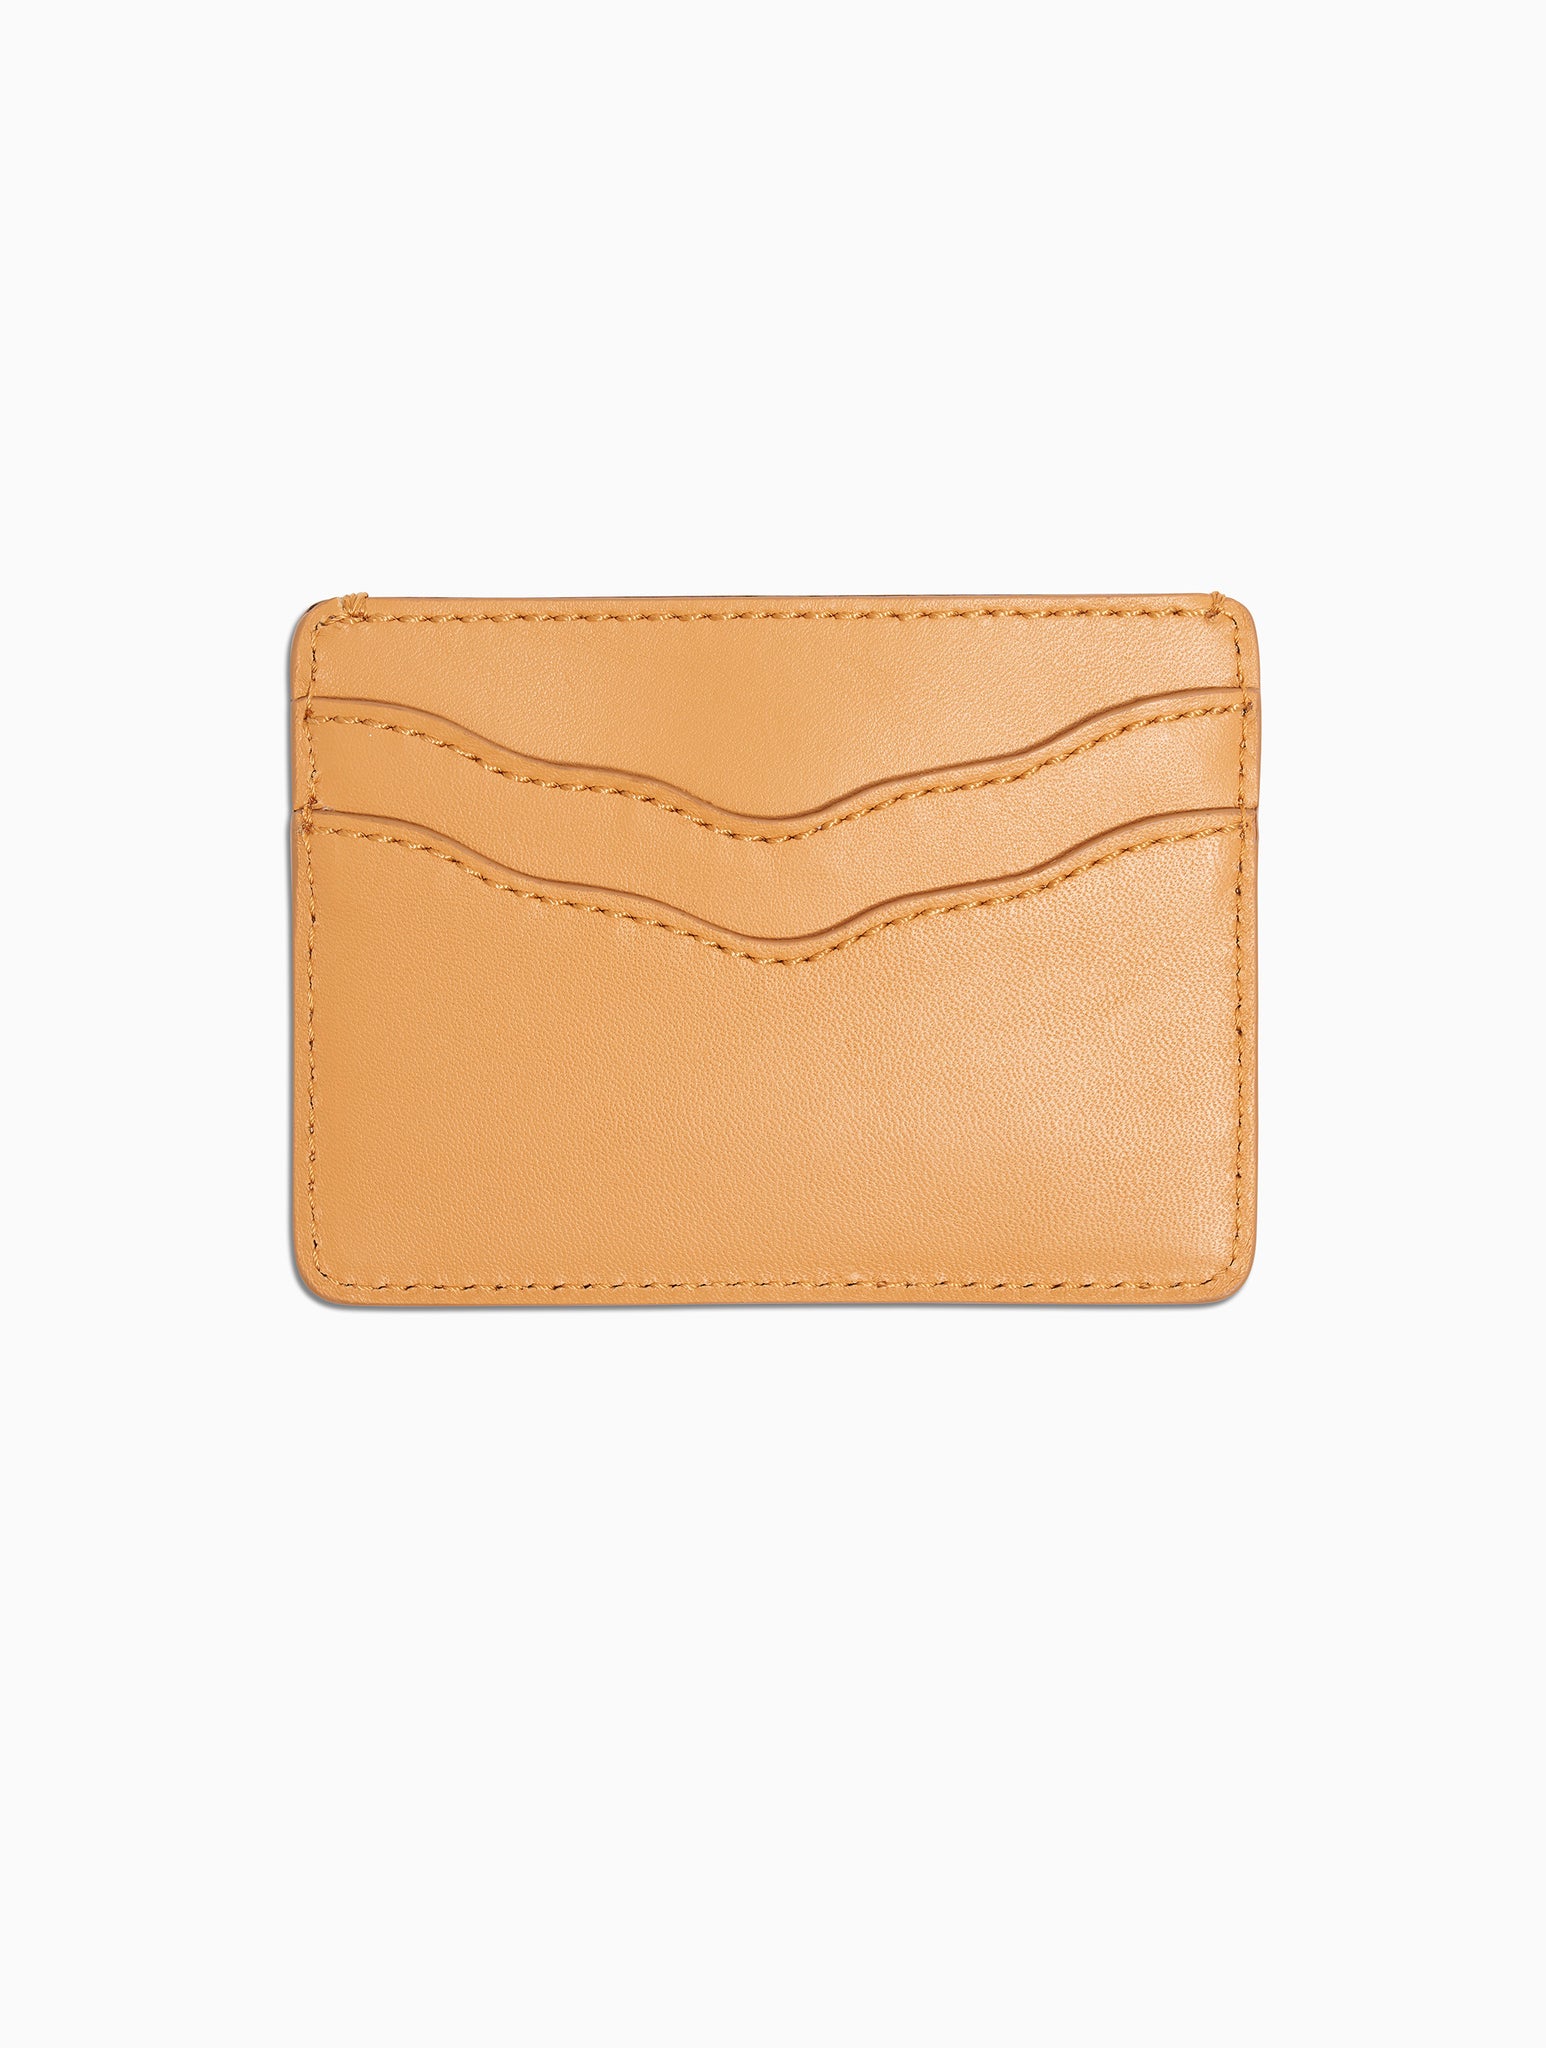 Cardholder in Maize